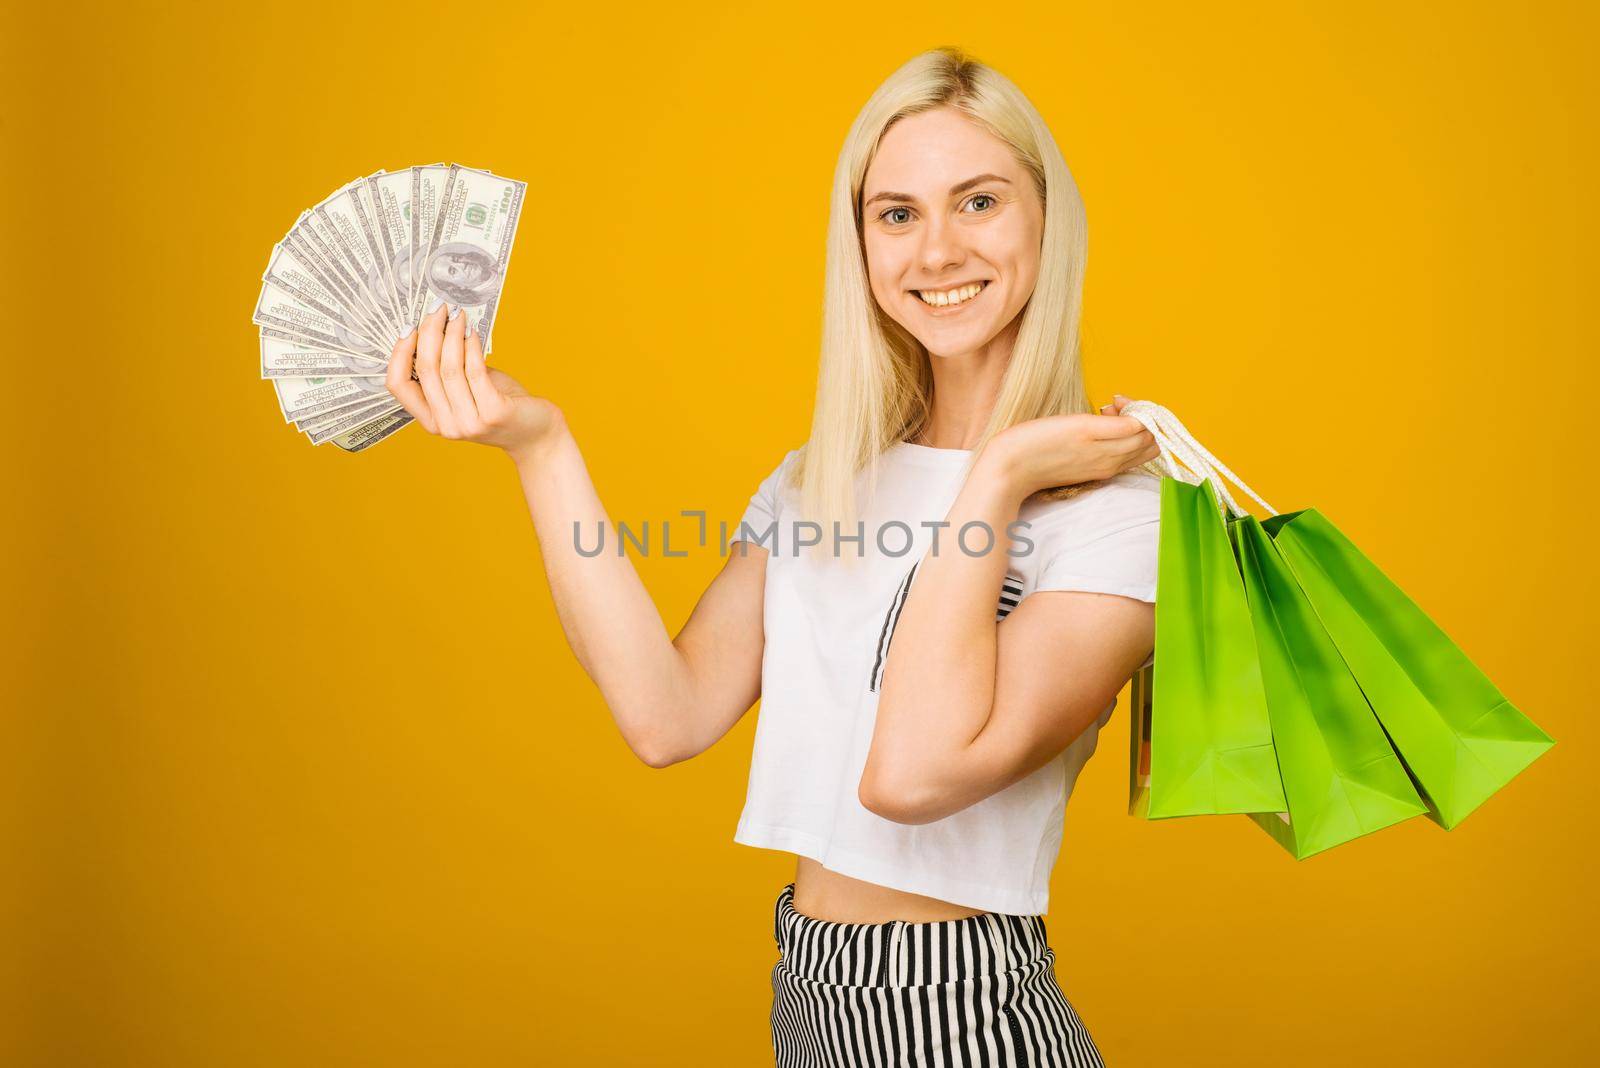 Close-up portrait of happy young beautiful blonde woman holding money and green shopping bags, looking at camera, isolated on yellow background - Image